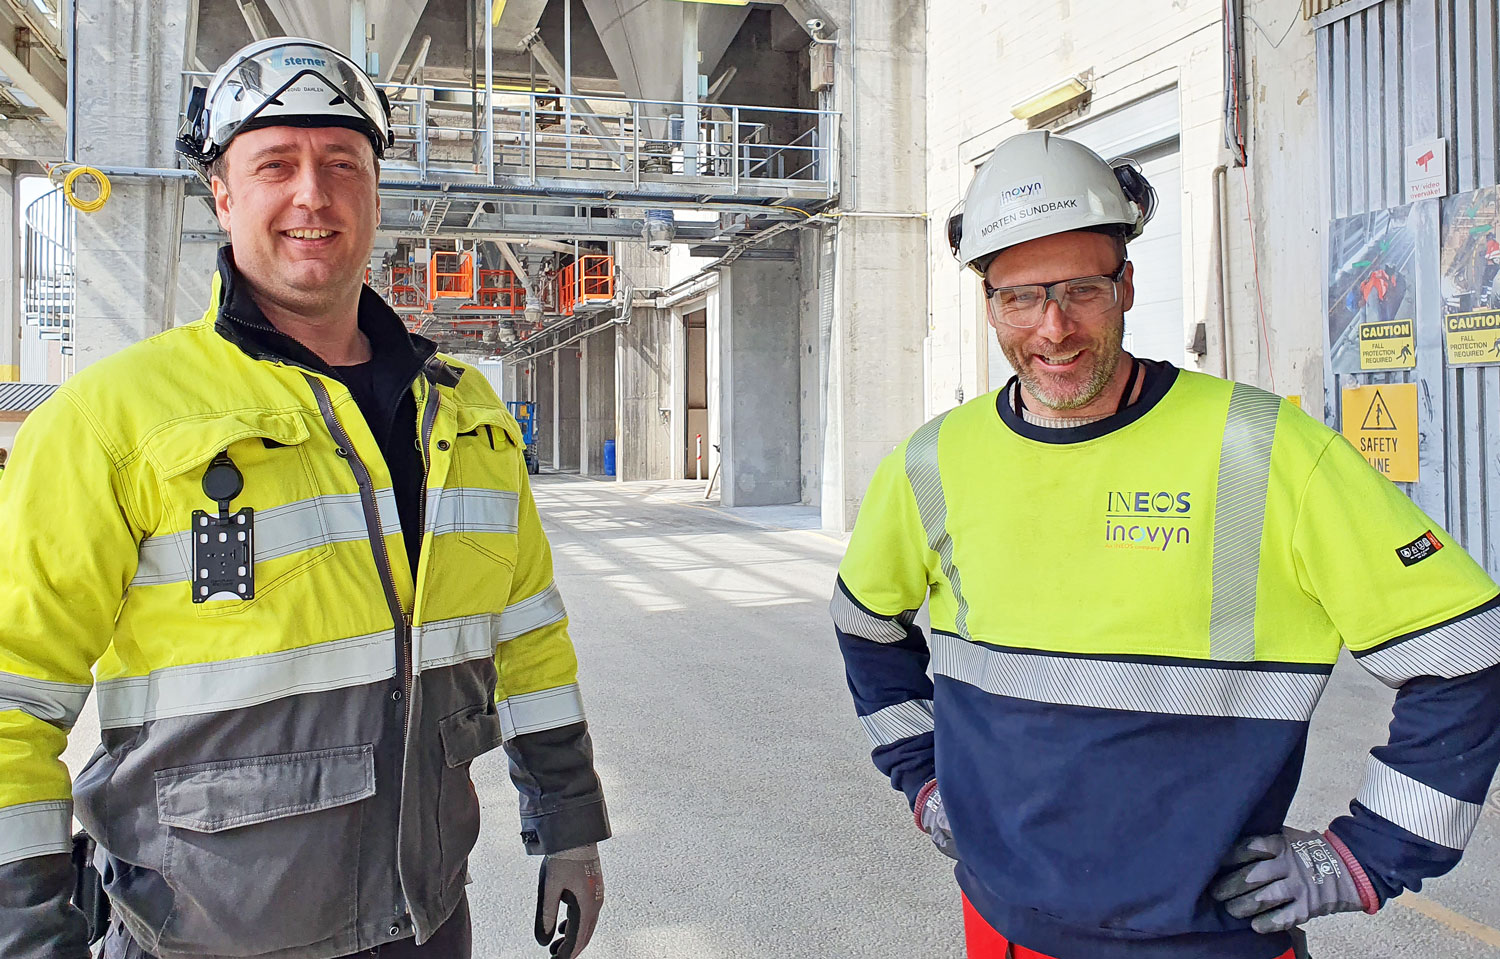 two men posing, working clothes, white helmets, production site